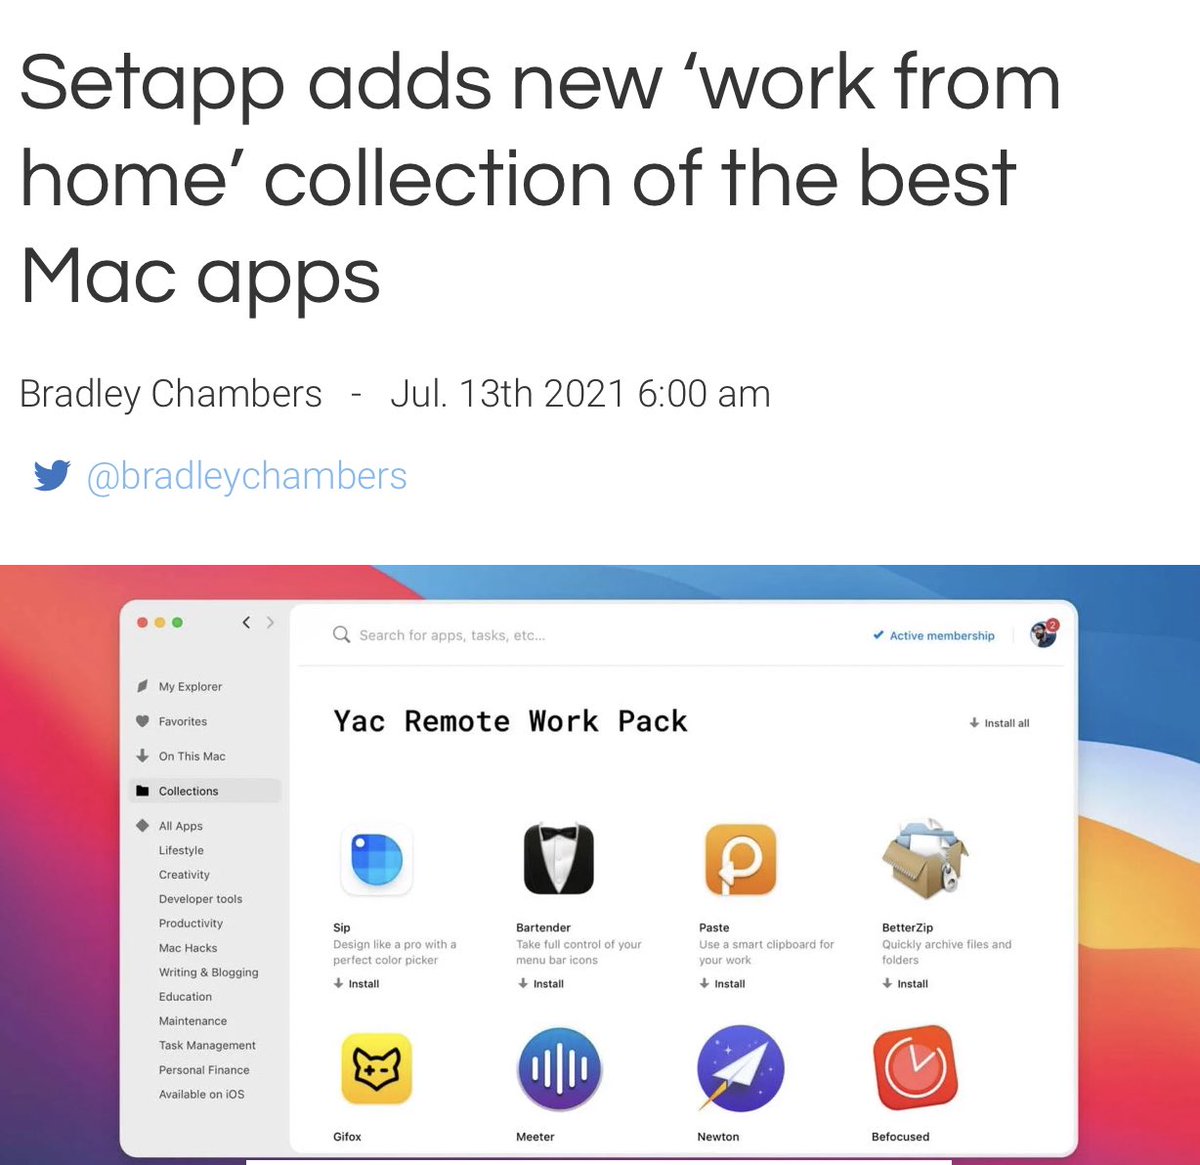 newton for mac email